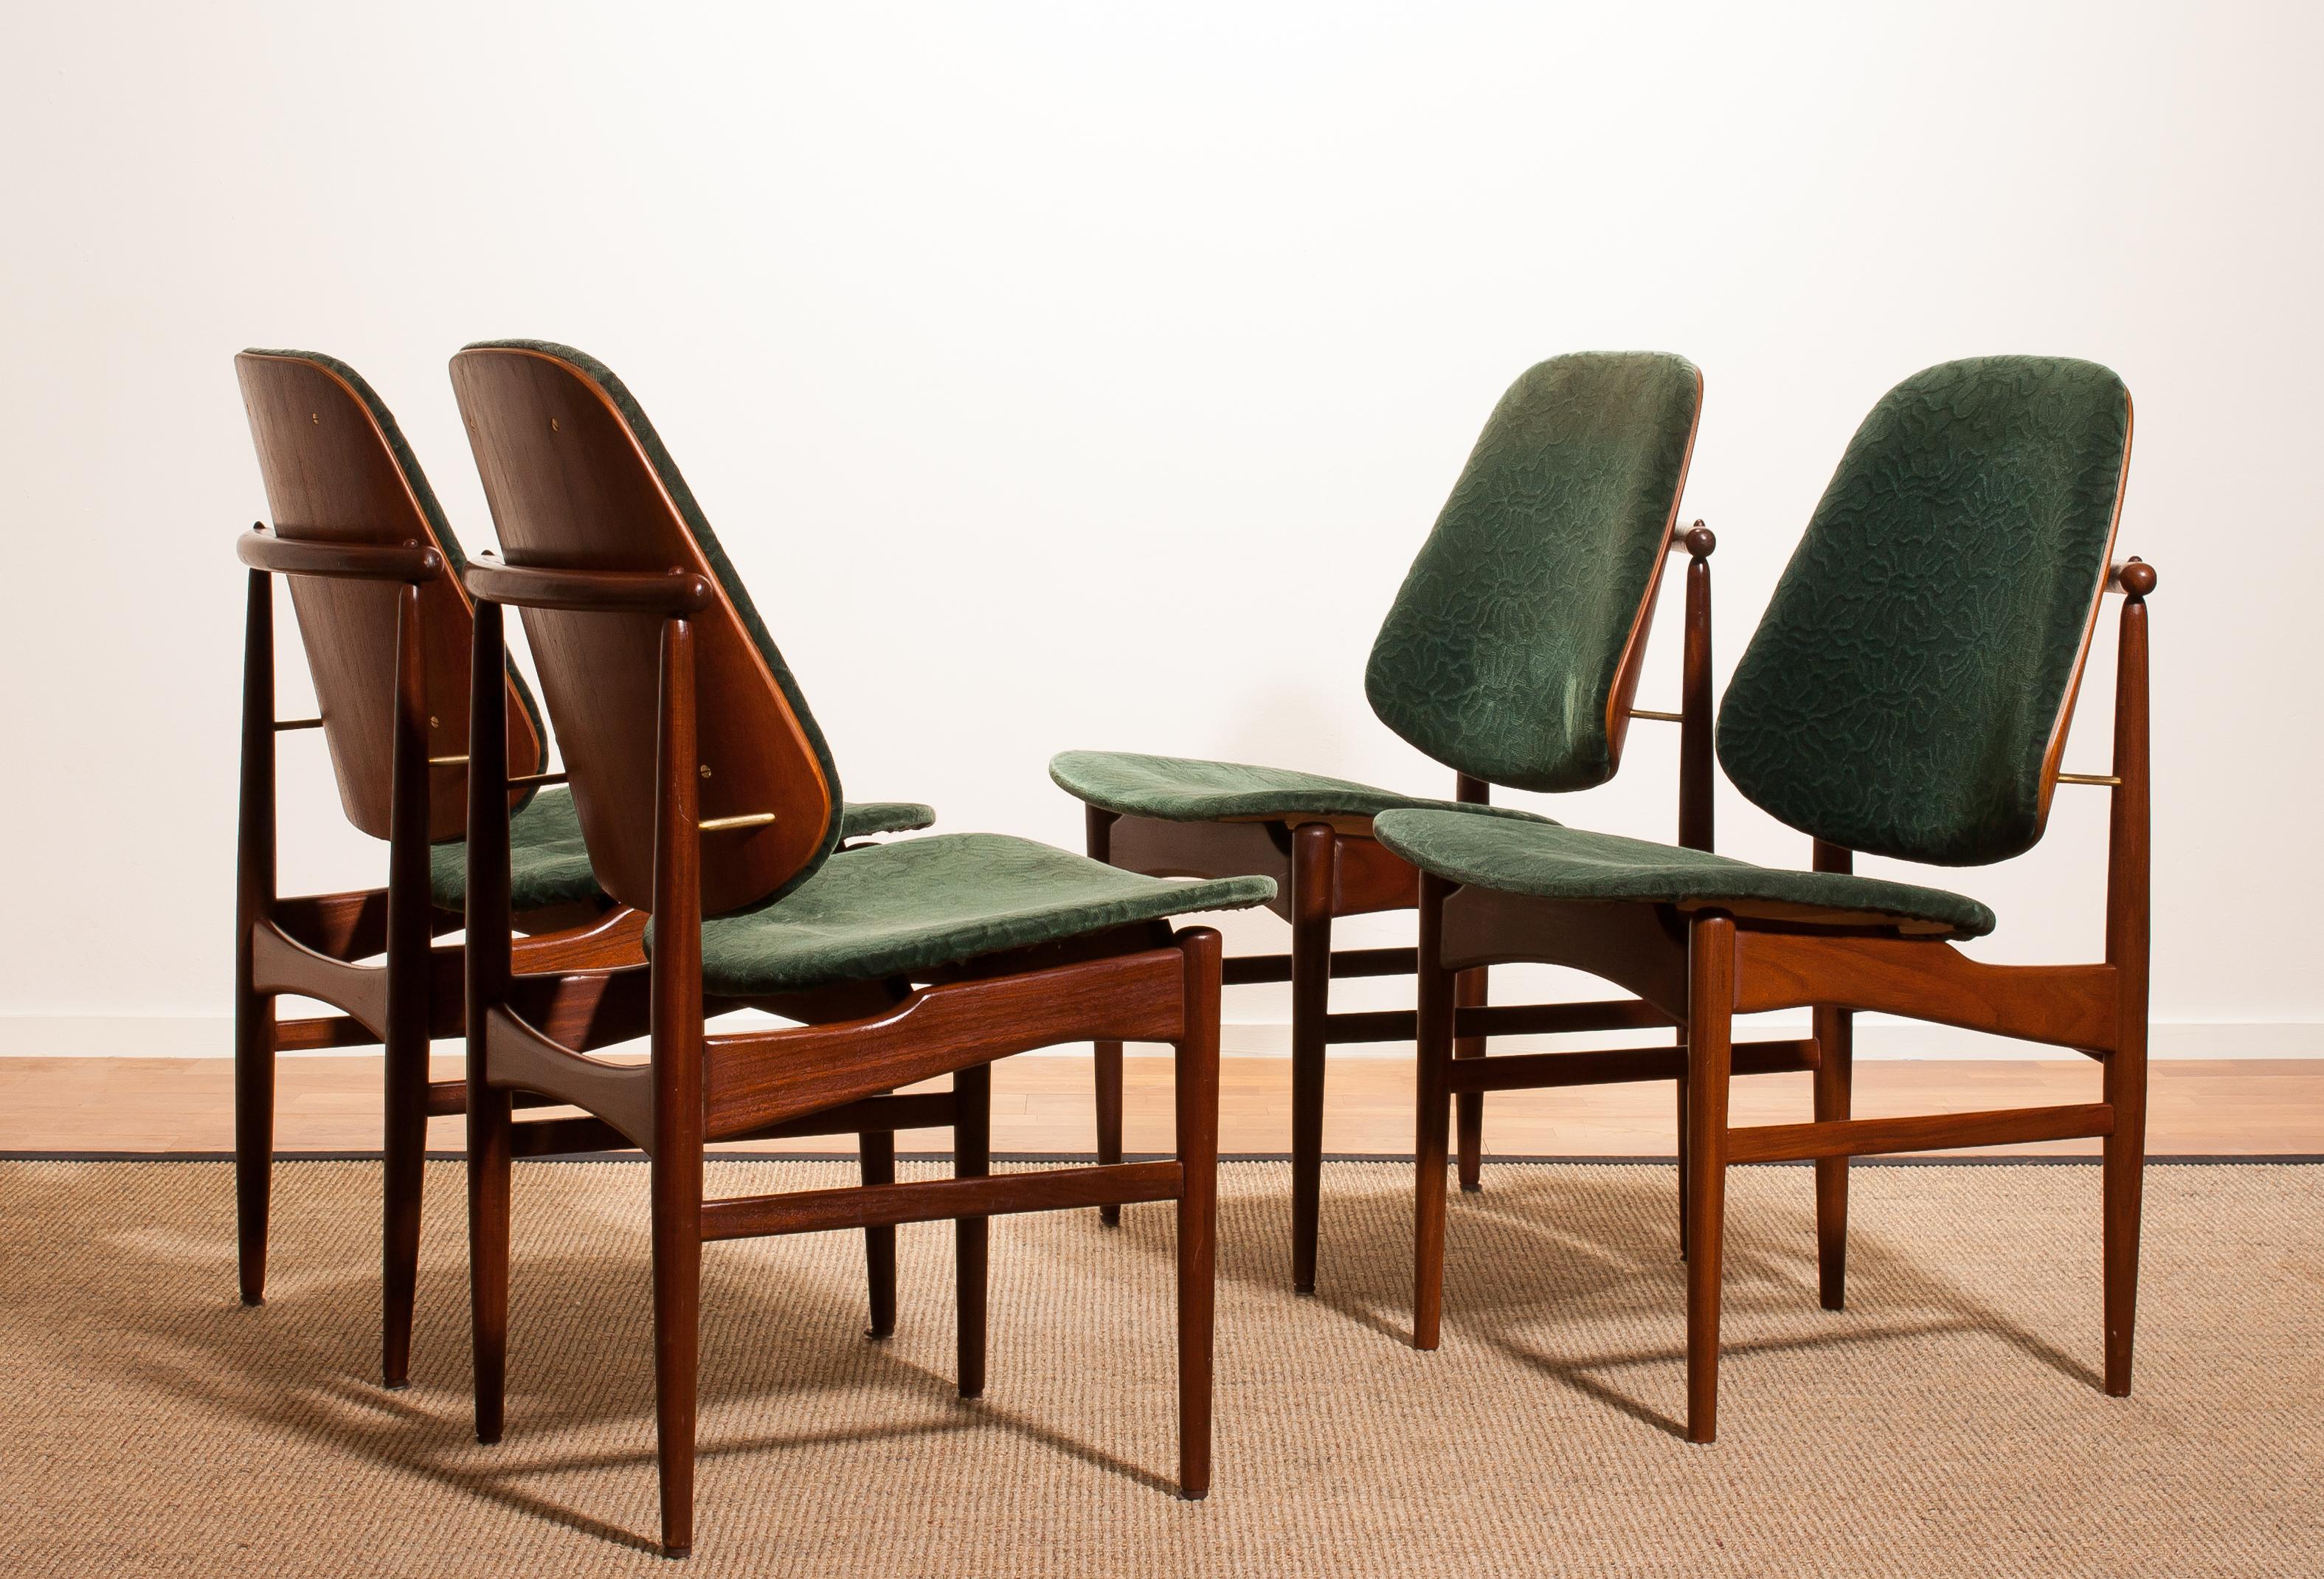 Beautiful set of four Arne Hovmand-Olsen design armchairs for Hovmand-Olsen & Jutex, Denmark.
The (original) fabric needs to be replaced!
These chairs sit extremely comfortable and are beautifully finished with beautiful bronze details.
The teak